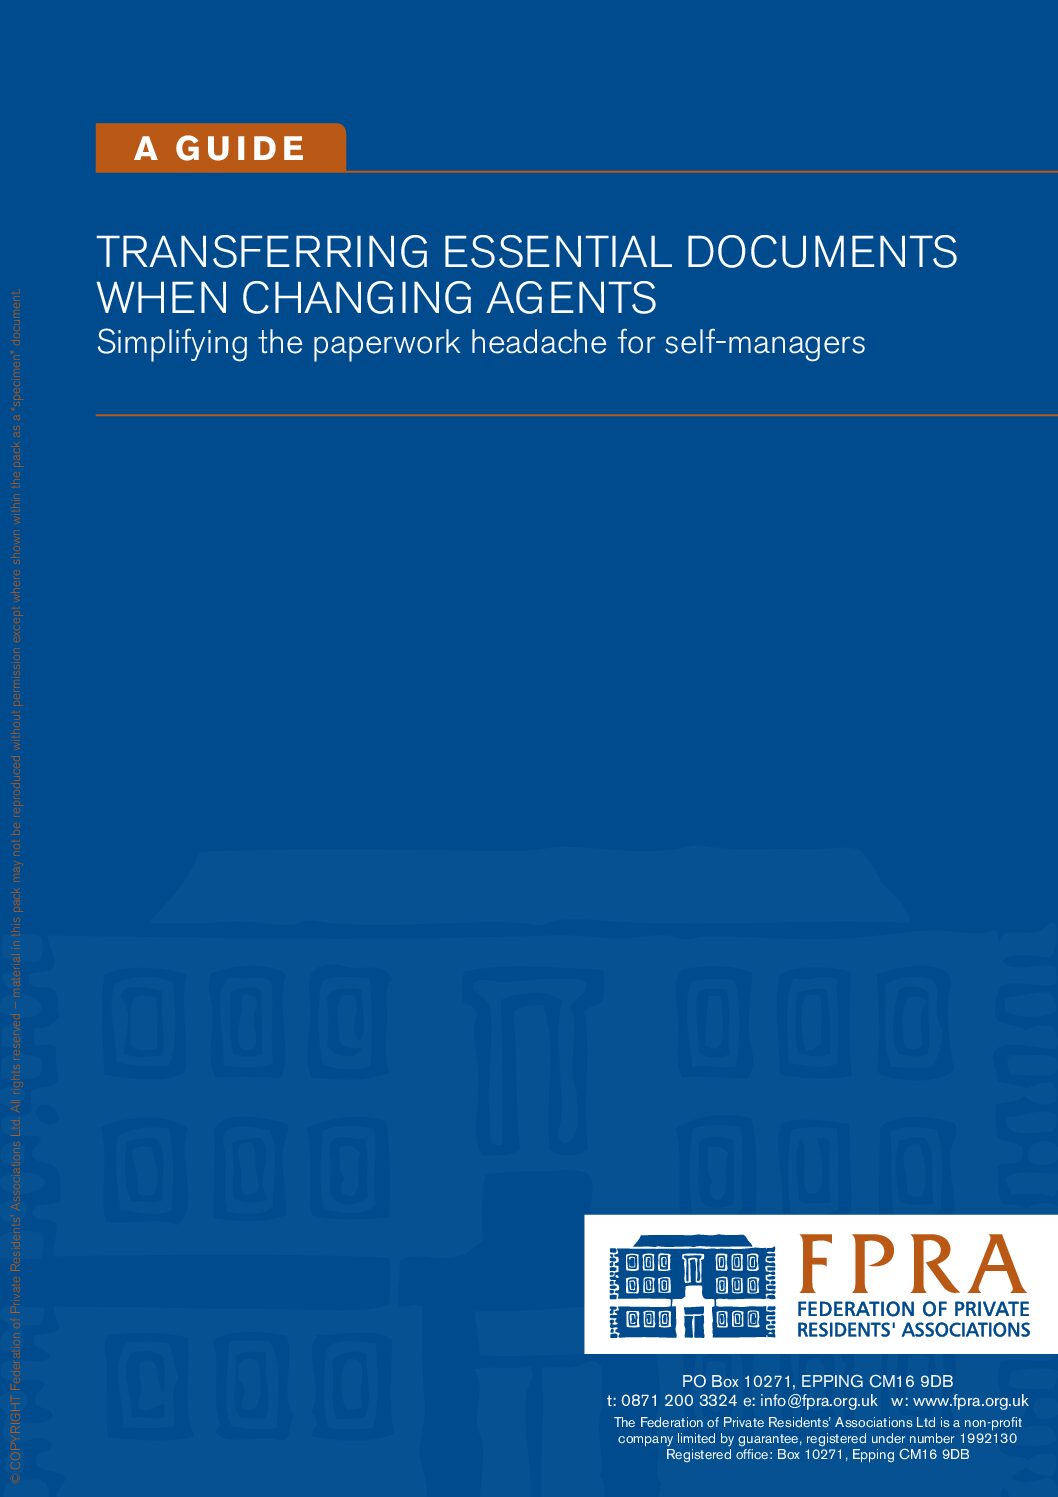 Guide to Transferring Essential Documents when Changing Agents